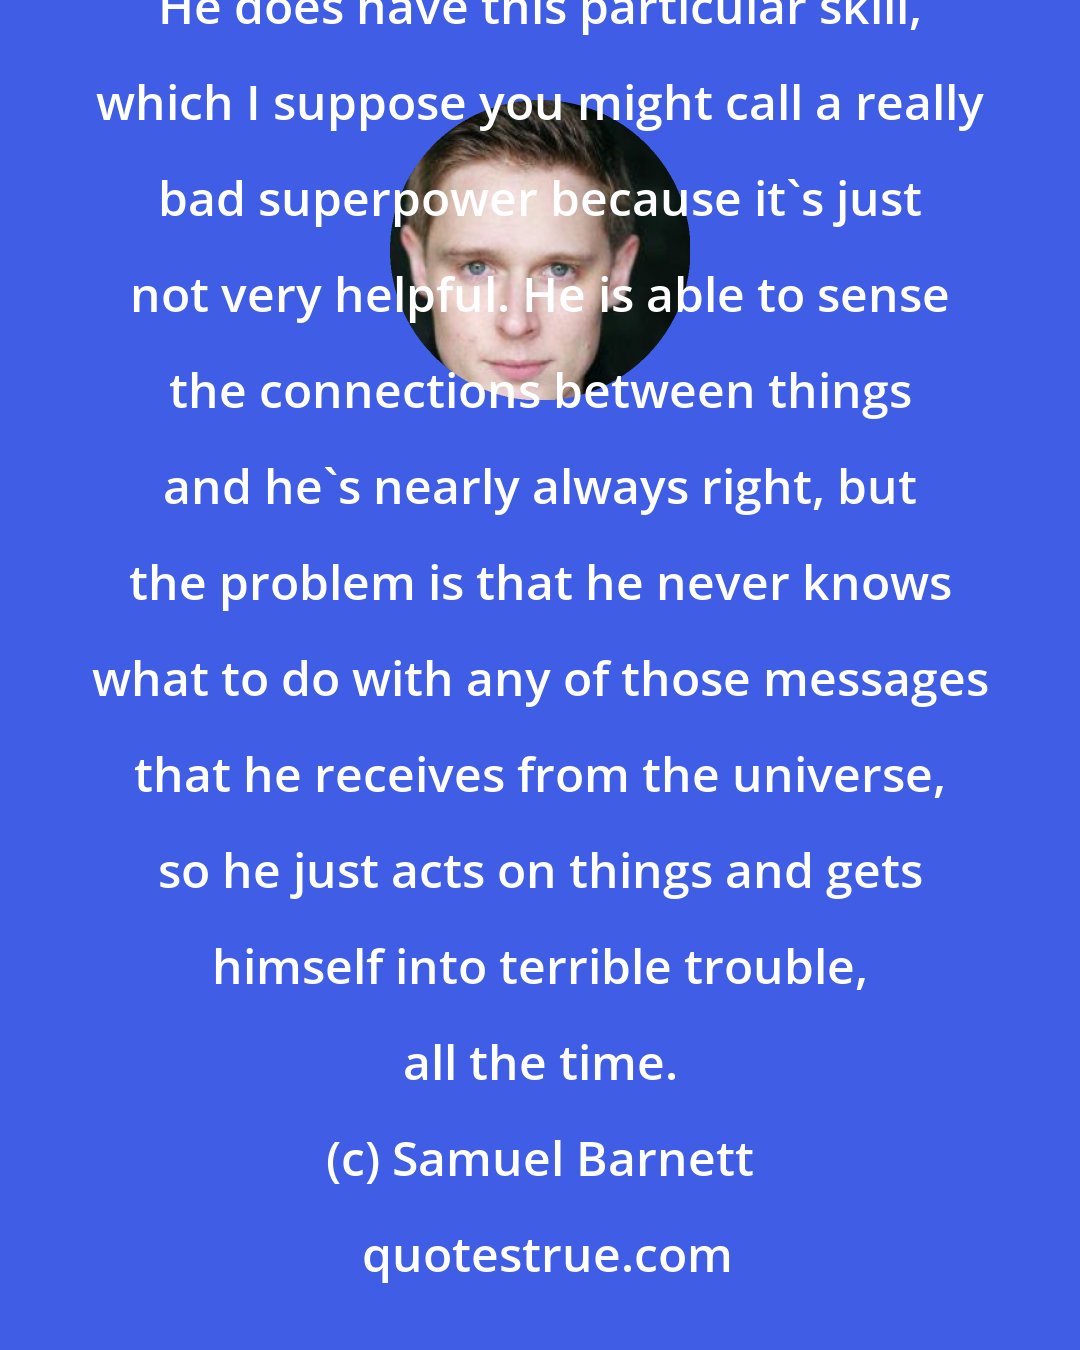 Samuel Barnett: I think Dirk [Gently] thinks that he's a brilliant detective, but he's the worst detective, ever. He does have this particular skill, which I suppose you might call a really bad superpower because it's just not very helpful. He is able to sense the connections between things and he's nearly always right, but the problem is that he never knows what to do with any of those messages that he receives from the universe, so he just acts on things and gets himself into terrible trouble, all the time.